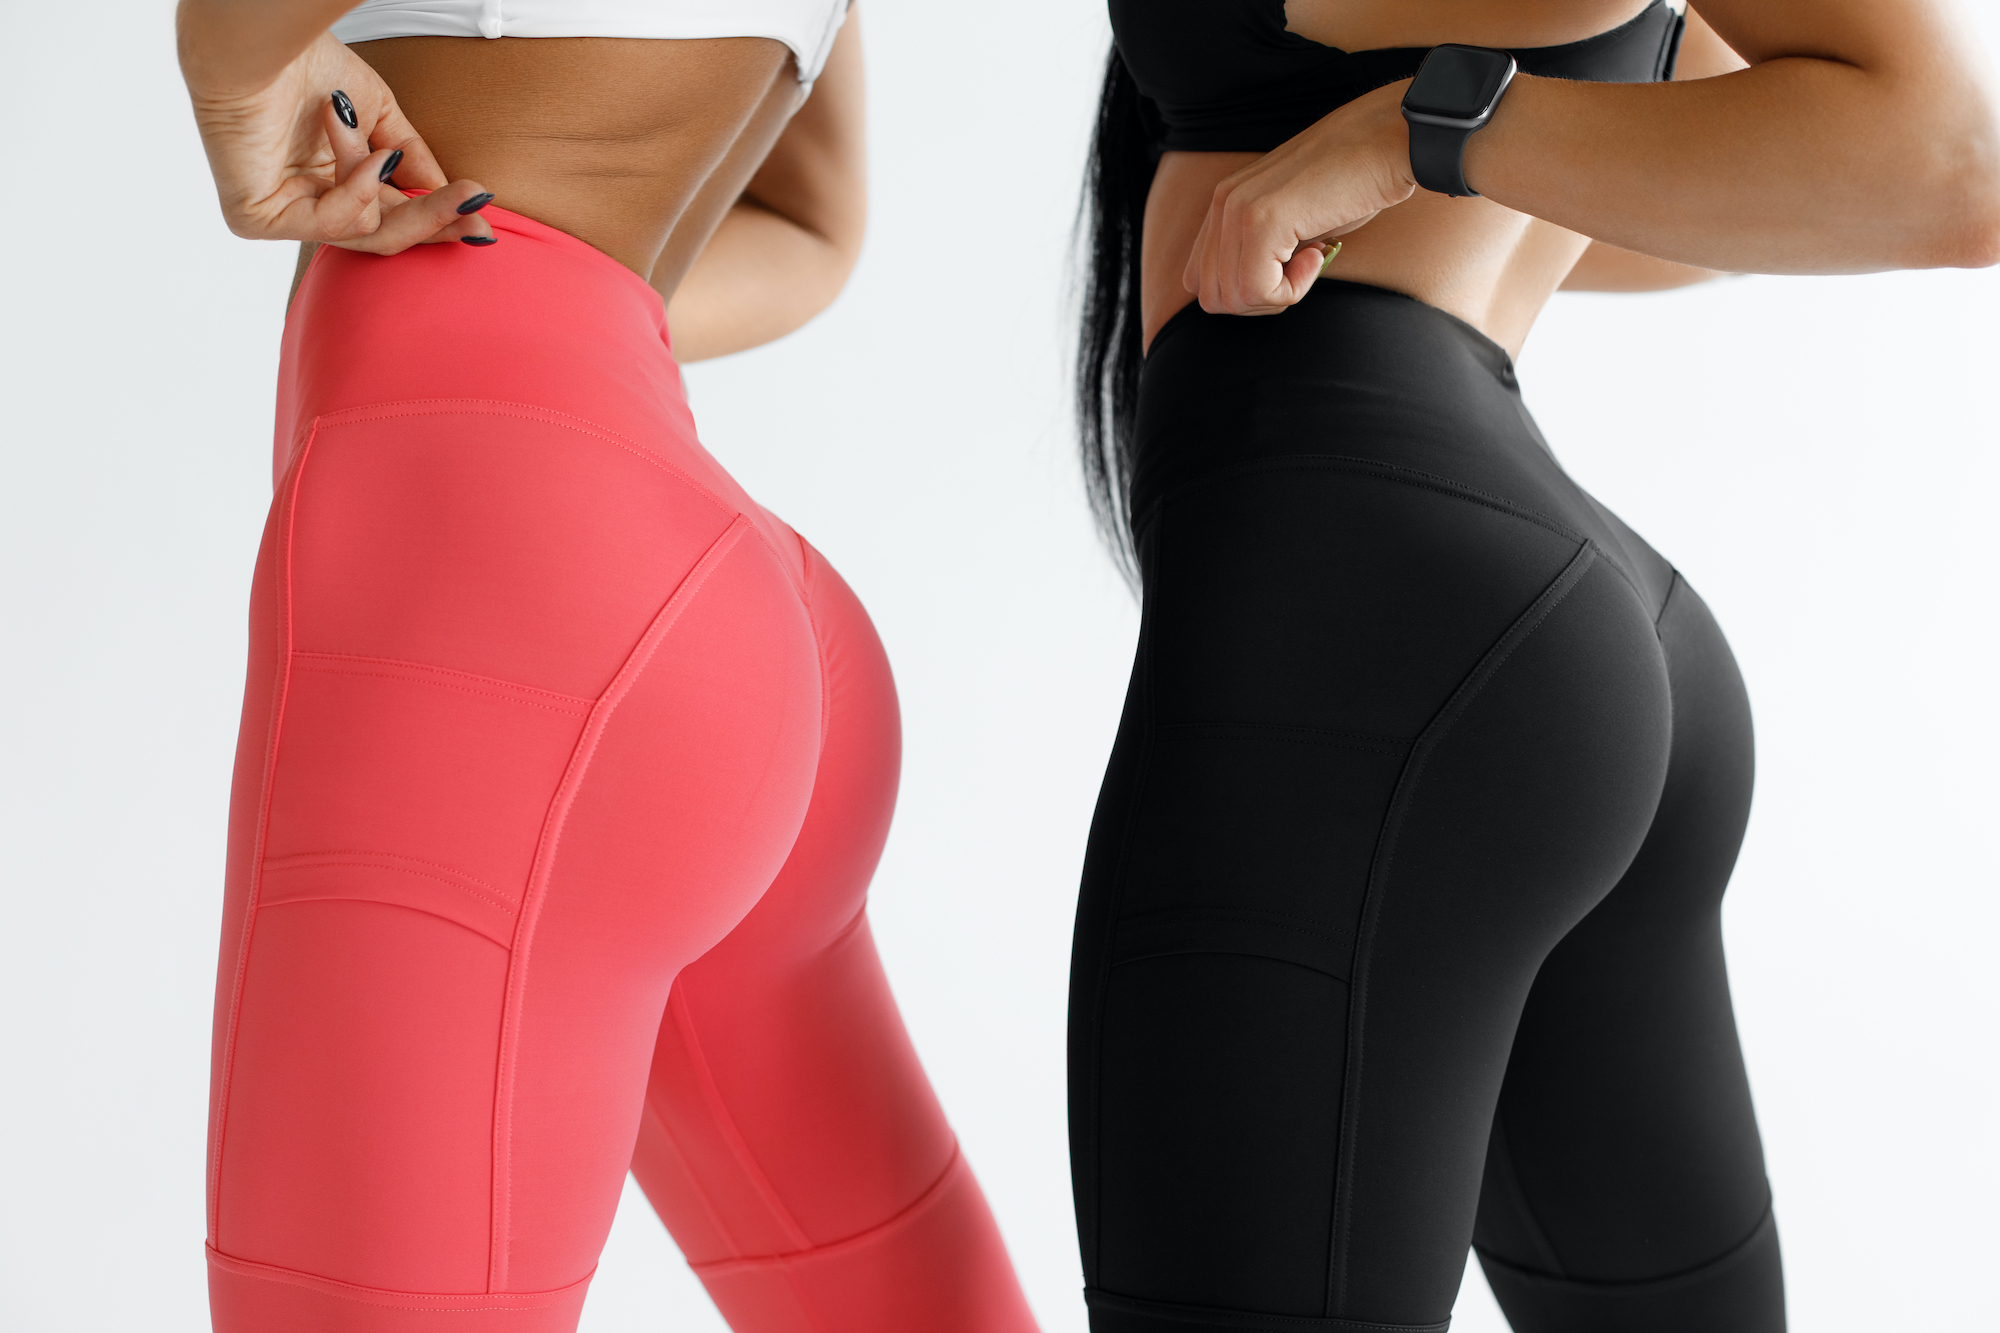 The $14 Kmart leggings every woman should own that transform your butt